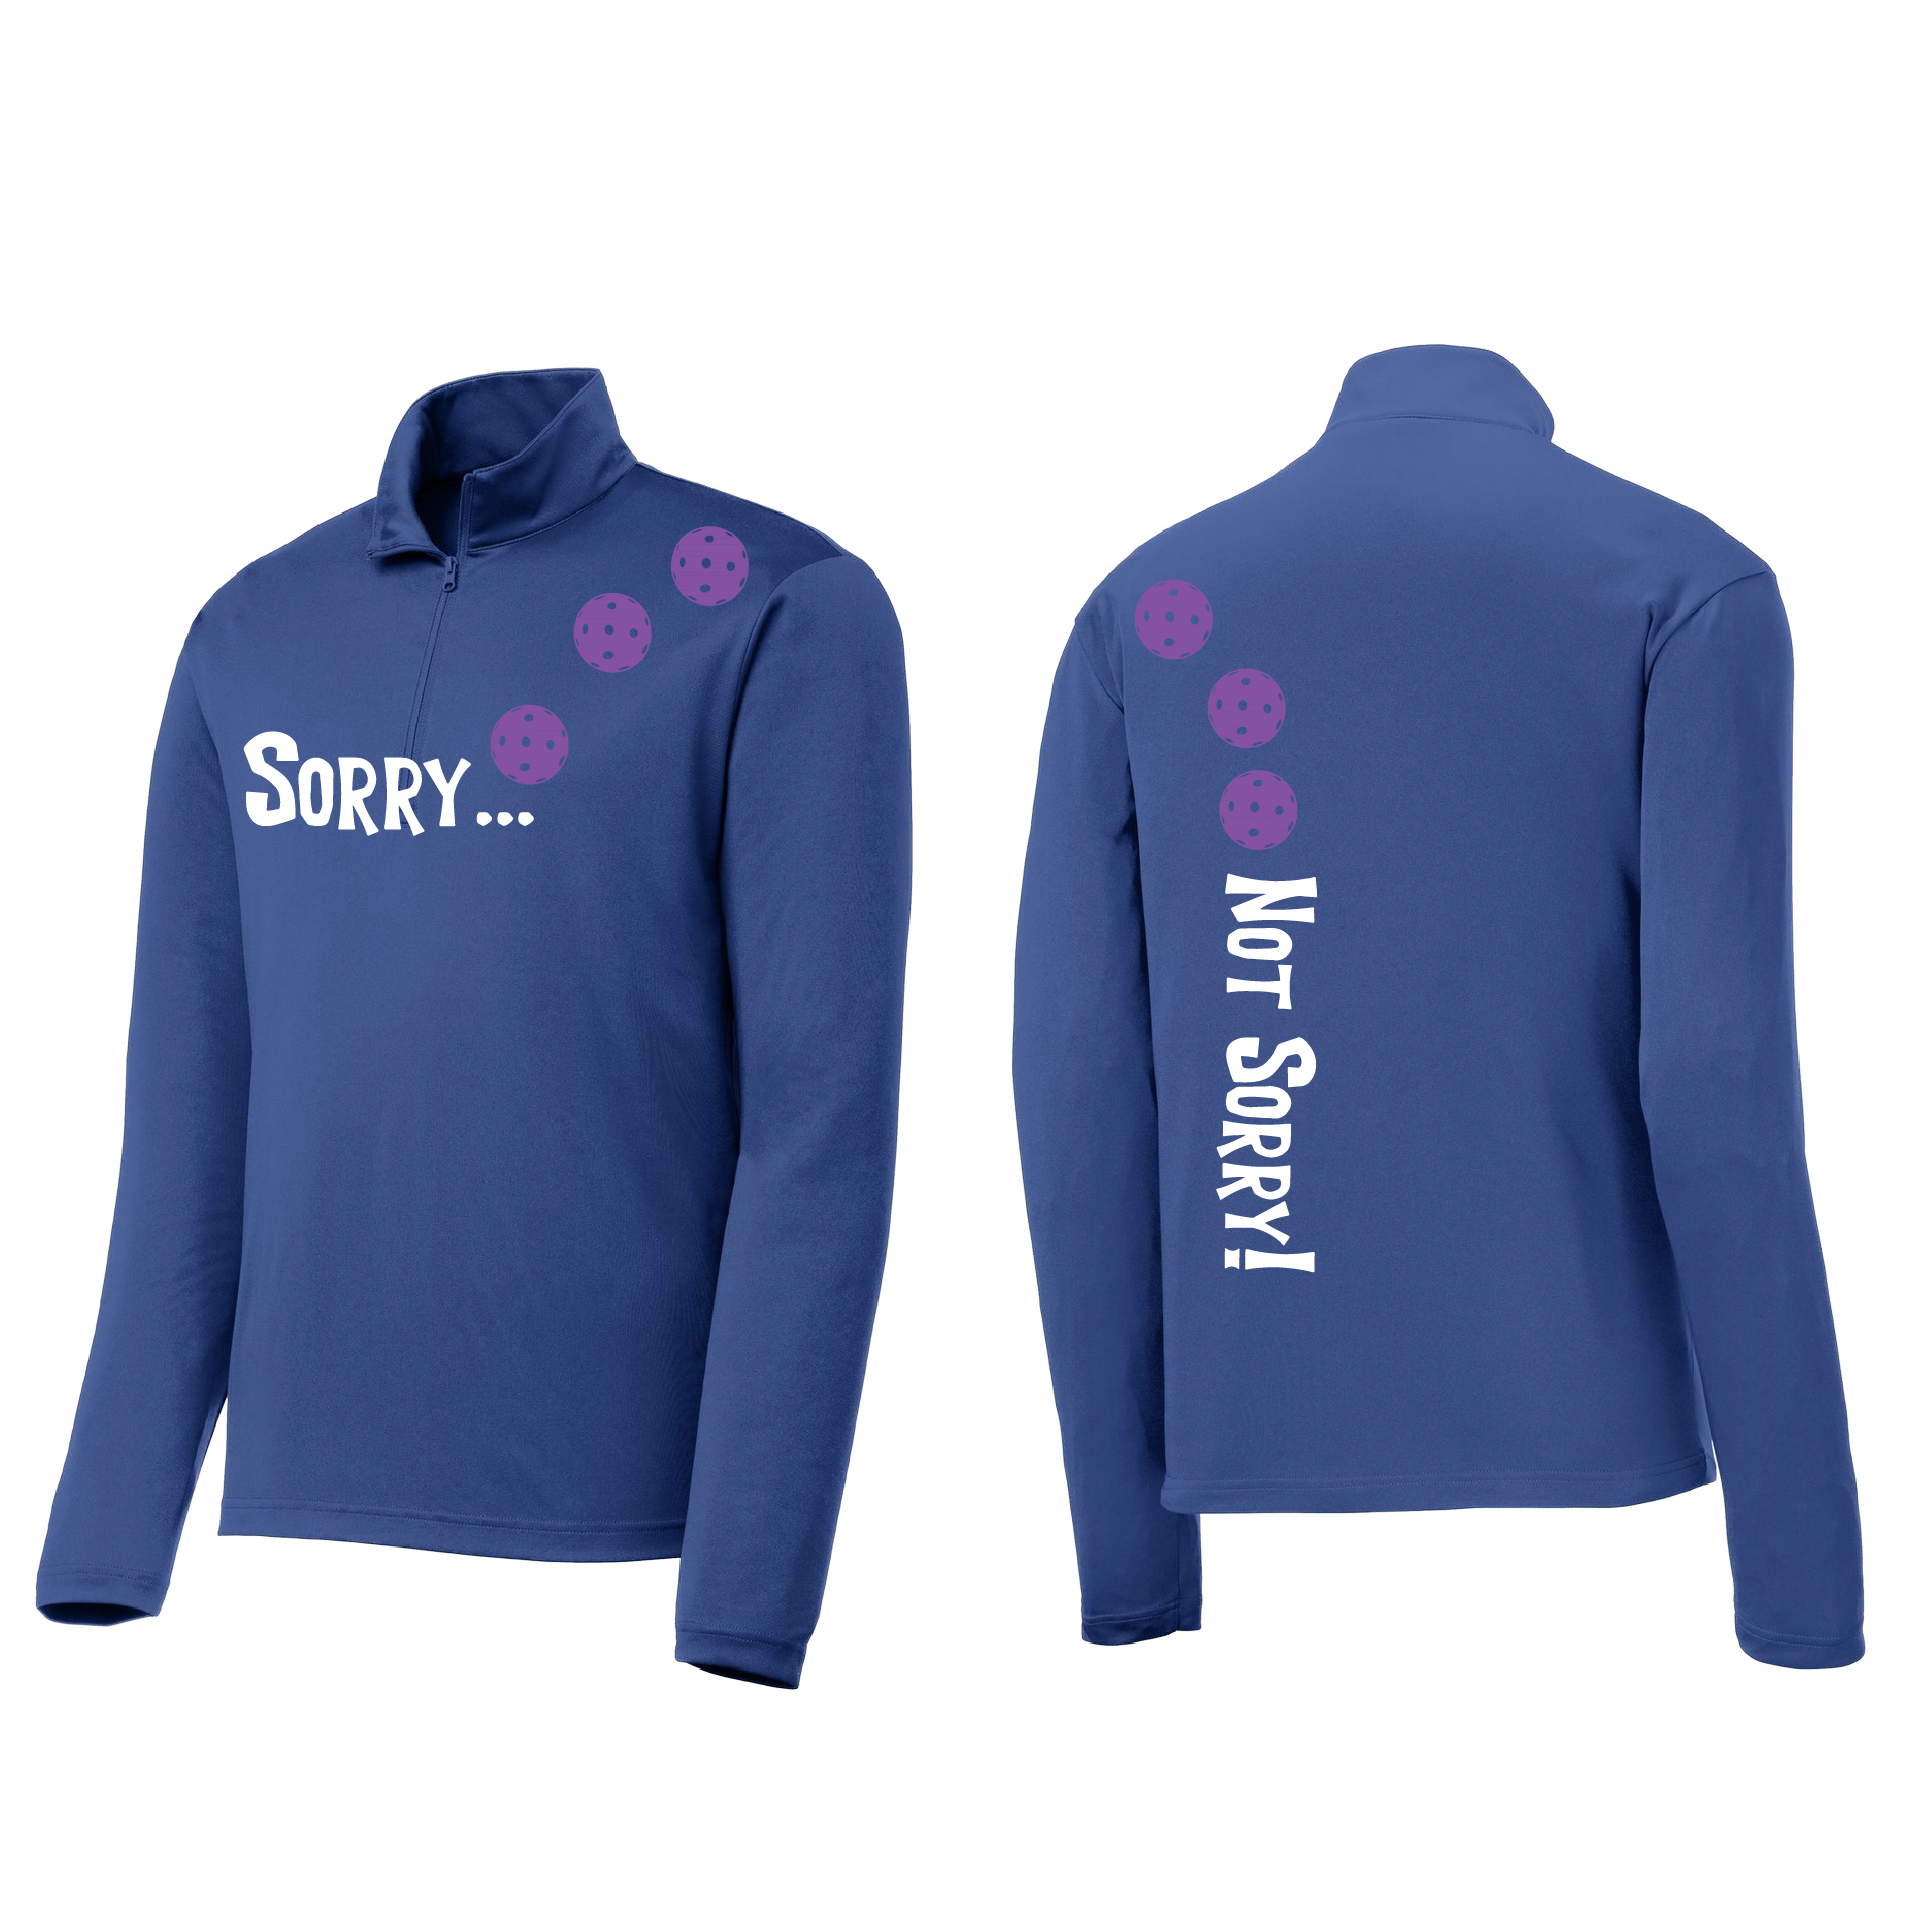 Pickleball Design: Sorry-Not Sorry Pickleball-Men’s 1/4 Zip Pullover-8 Ball Colors ..Customizable Ball Color - Choose: Cyan, Orange, Purple or Rainbow Turn up the volume in this Men's shirt with its perfect mix of softness and attitude. Material is ultra-comfortable with moisture wicking properties and tri-blend softness. PosiCharge technology locks in color. Highly breathable and lightweight. Versatile enough for wearing year-round.